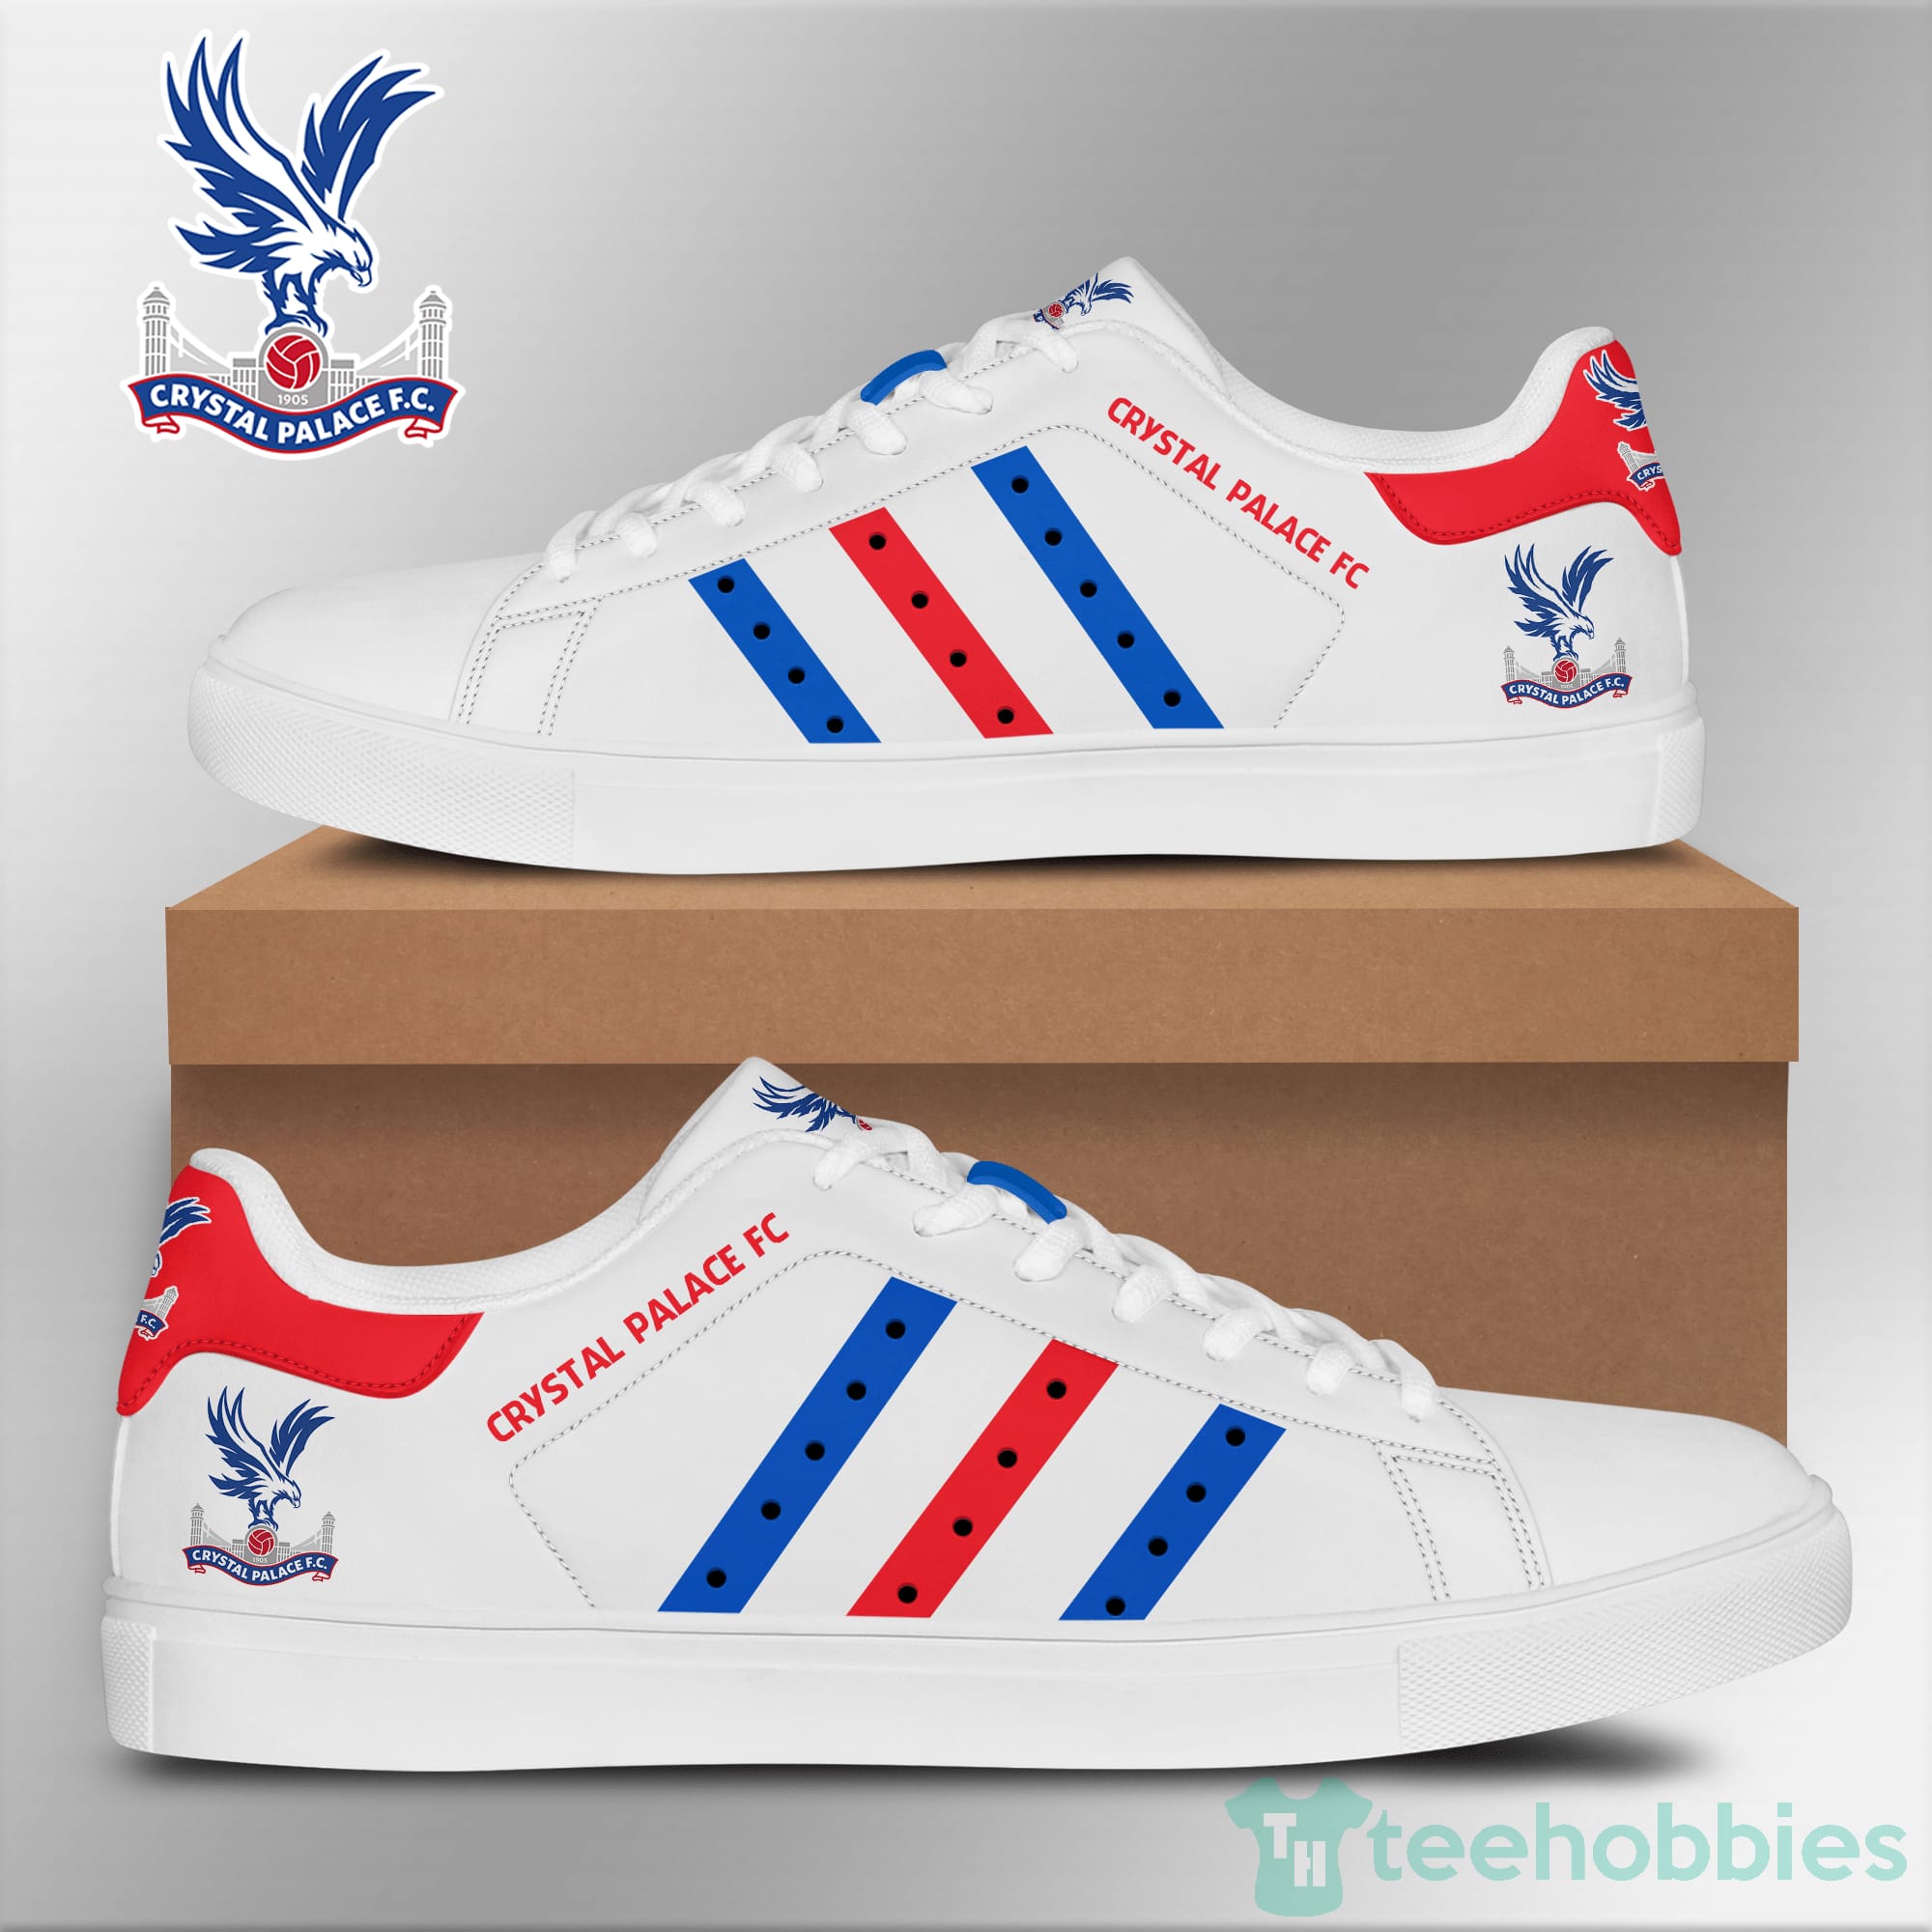 Crystal Palace Fc For Fans Low Top Skate Shoes Product photo 1